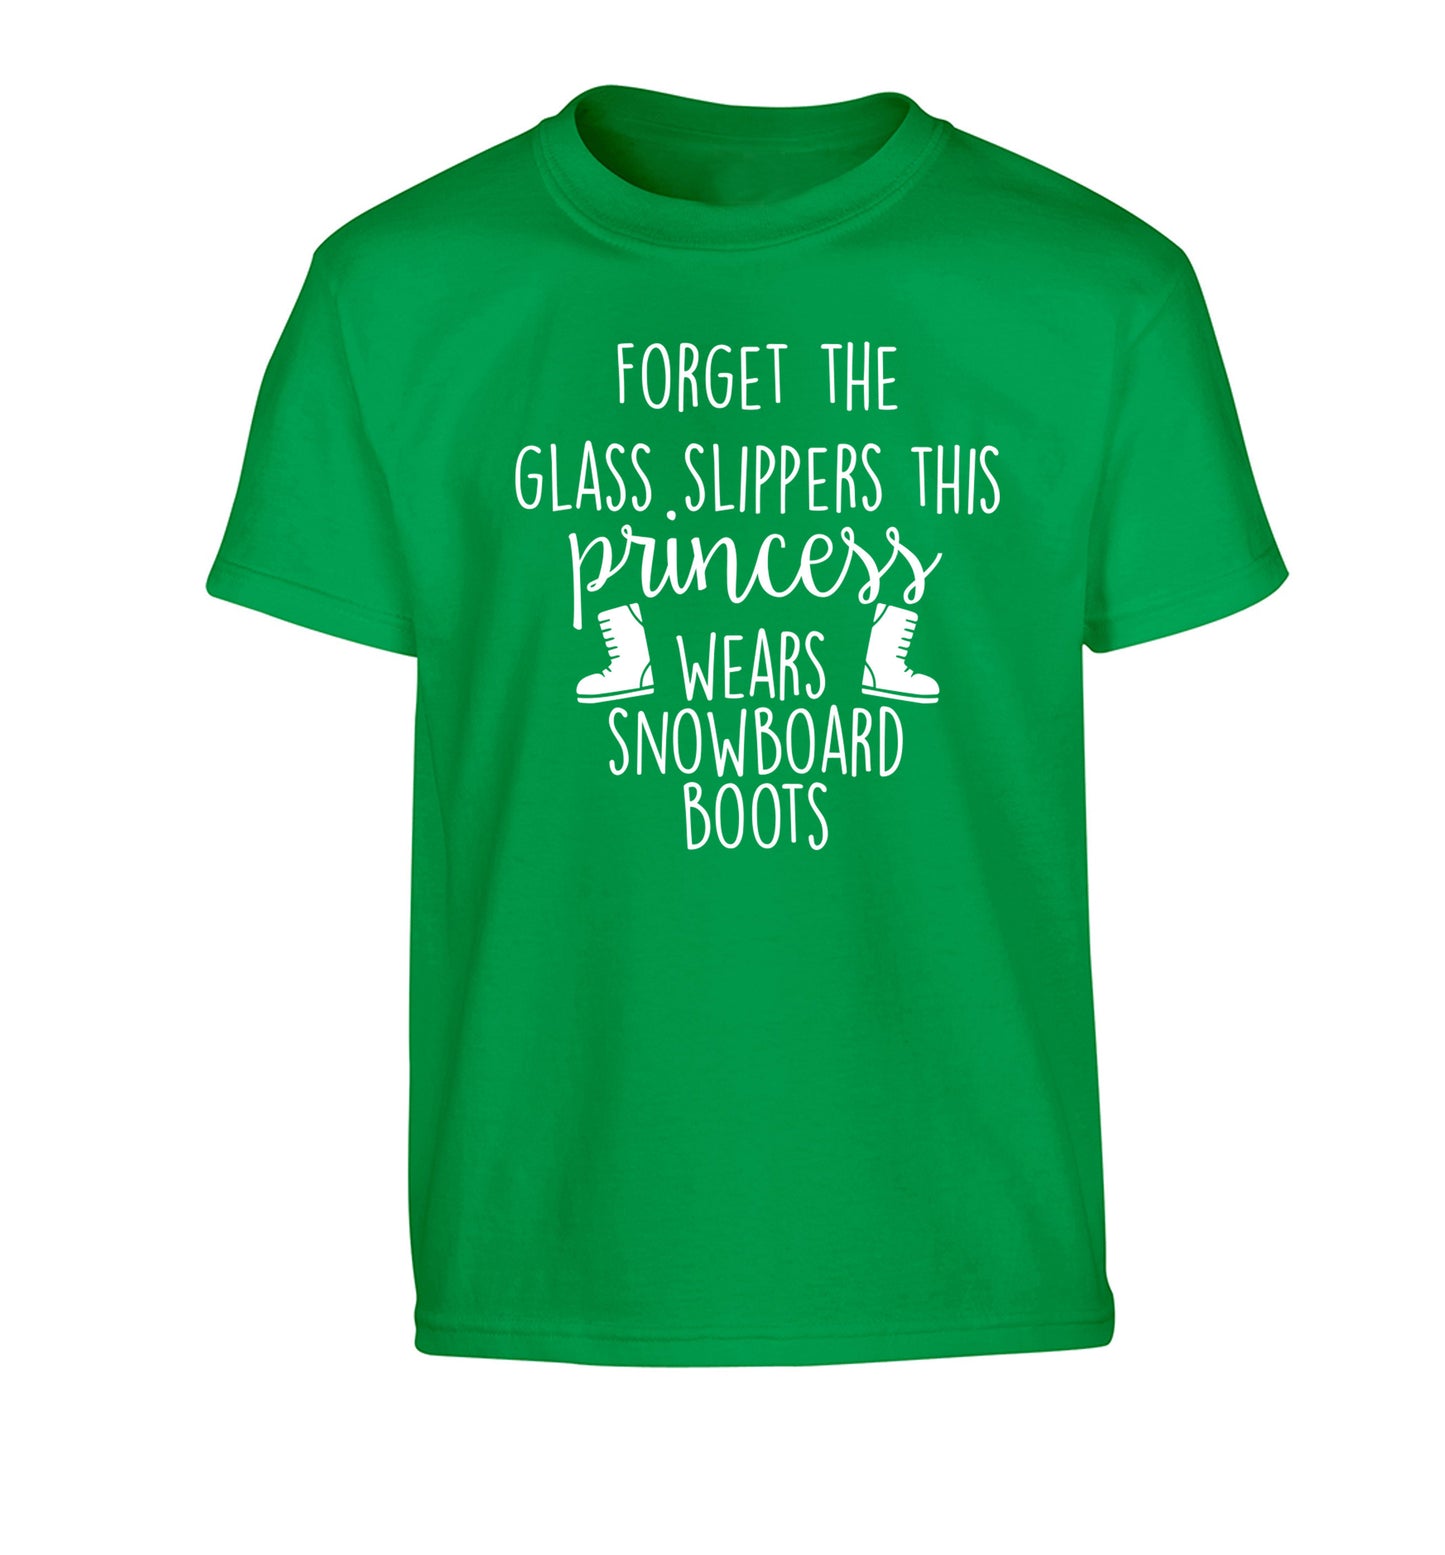 Forget the glass slippers this princess wears snowboard boots Children's green Tshirt 12-14 Years